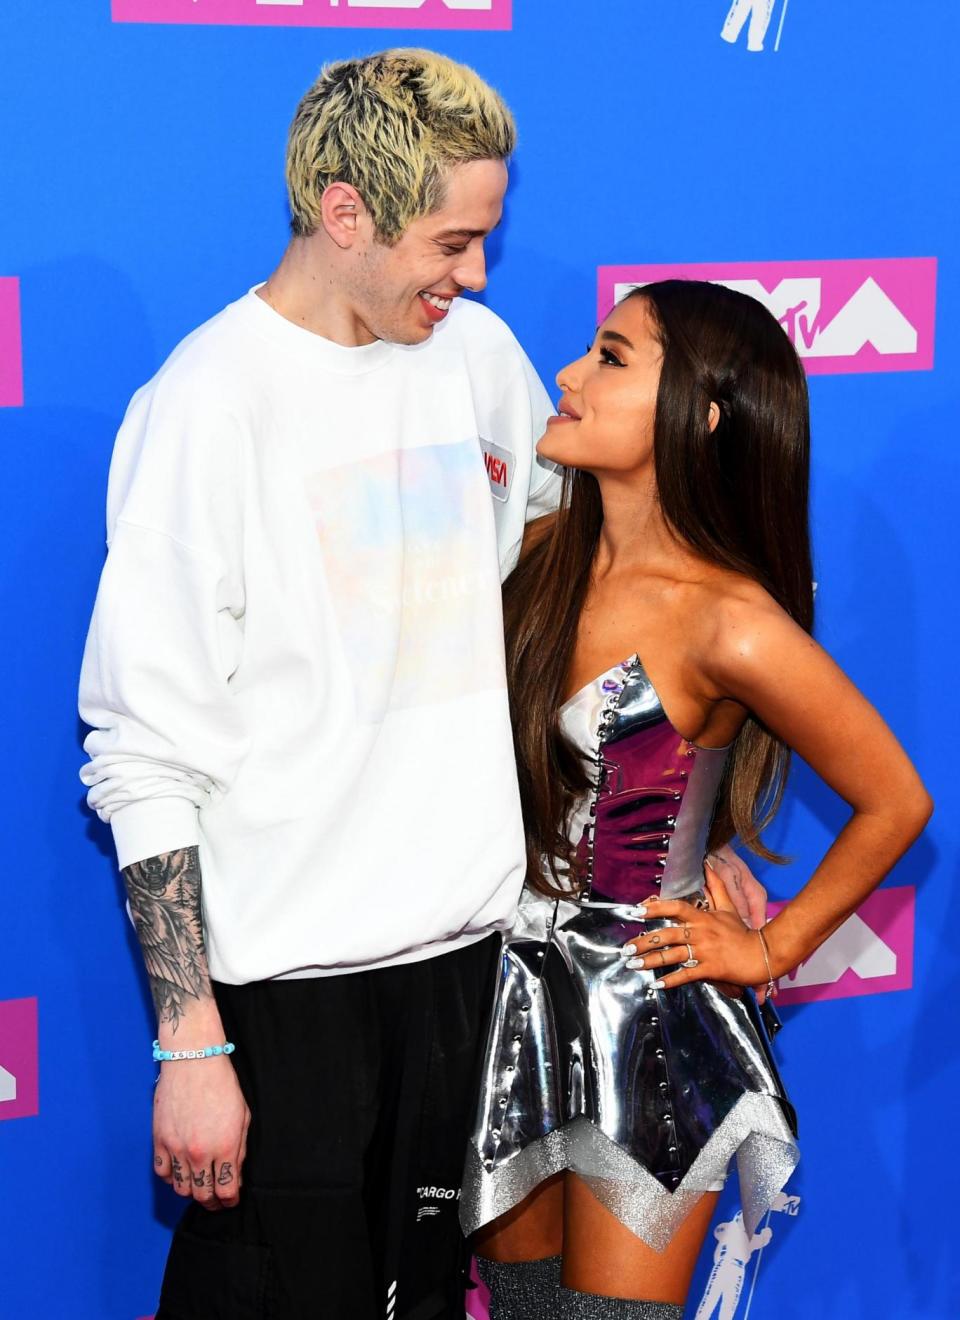 All over? Ariana Grande and Pete Davidson had a whirlwind romance (Getty Images for MTV)